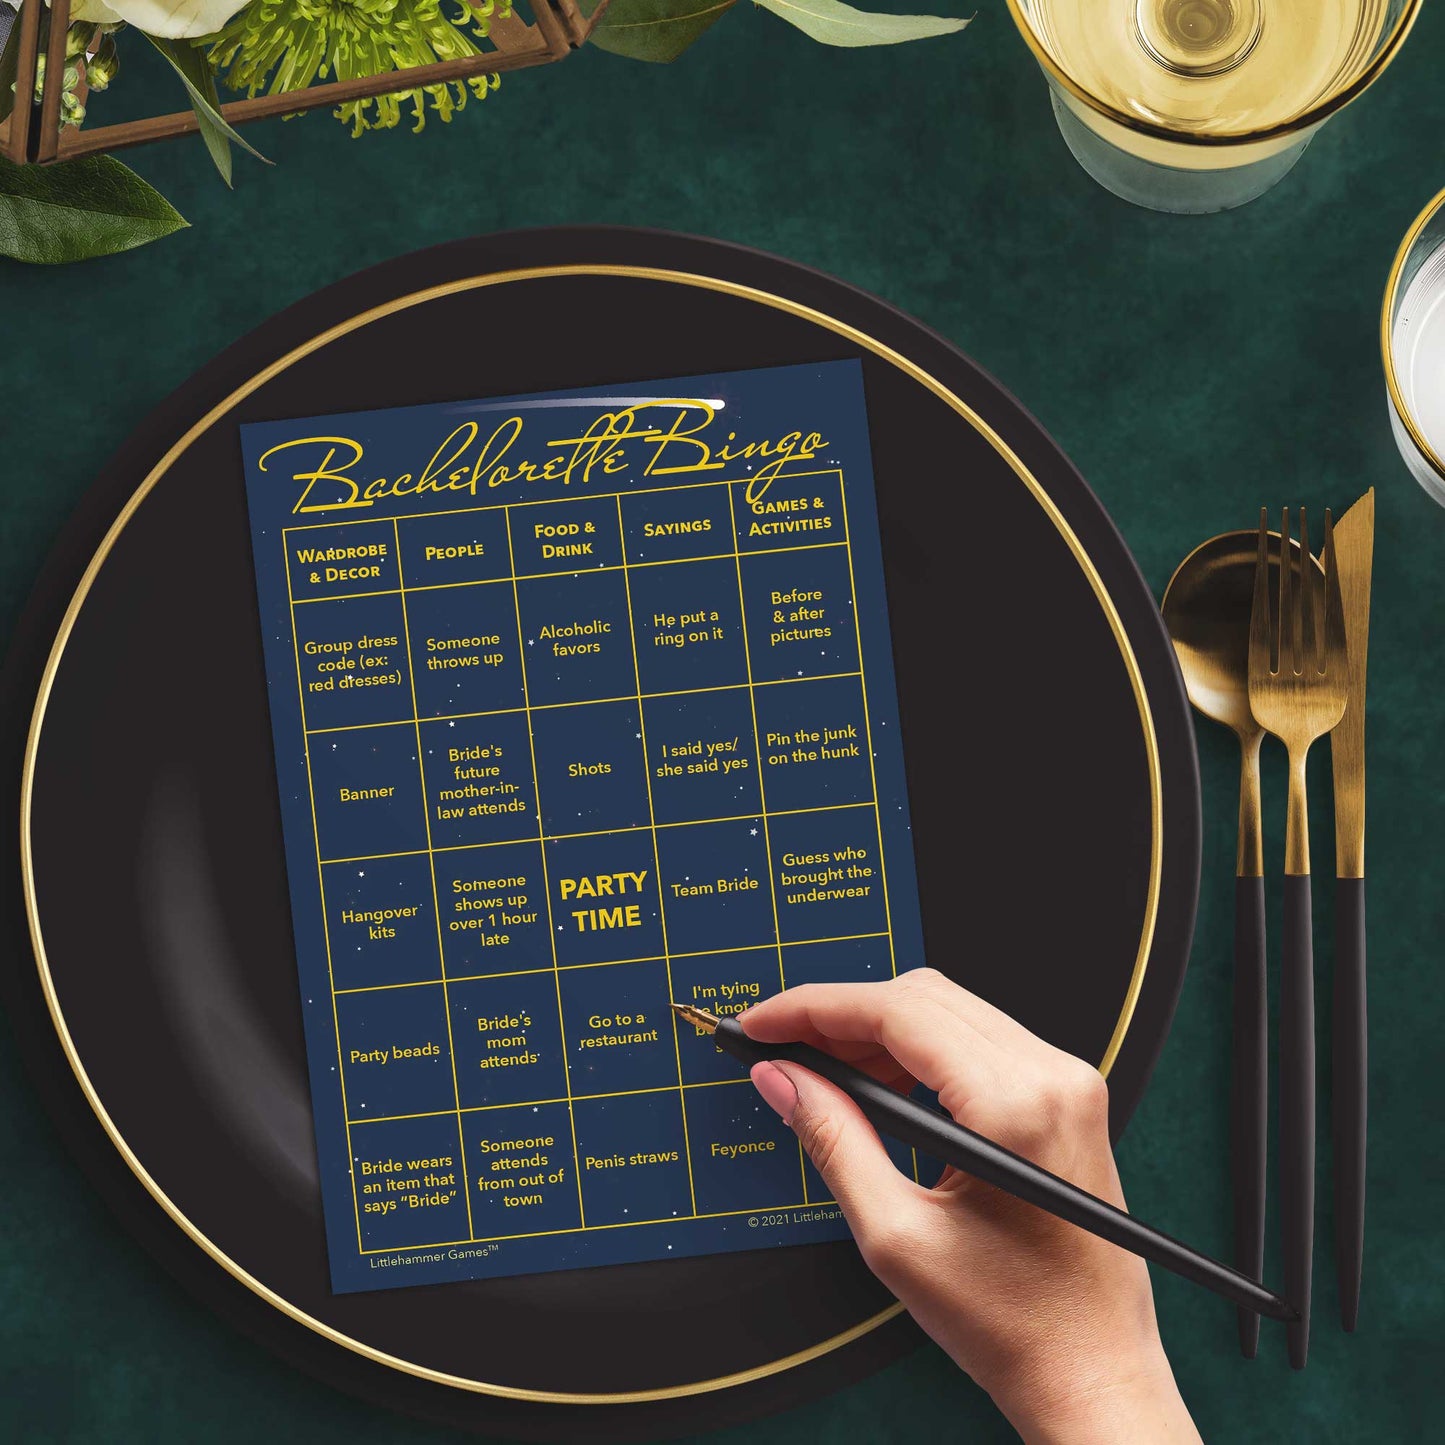 Woman with a pen sitting at a table with a celestial themed Bachelorette Bingo game card on a gold and black plate on a dark place setting